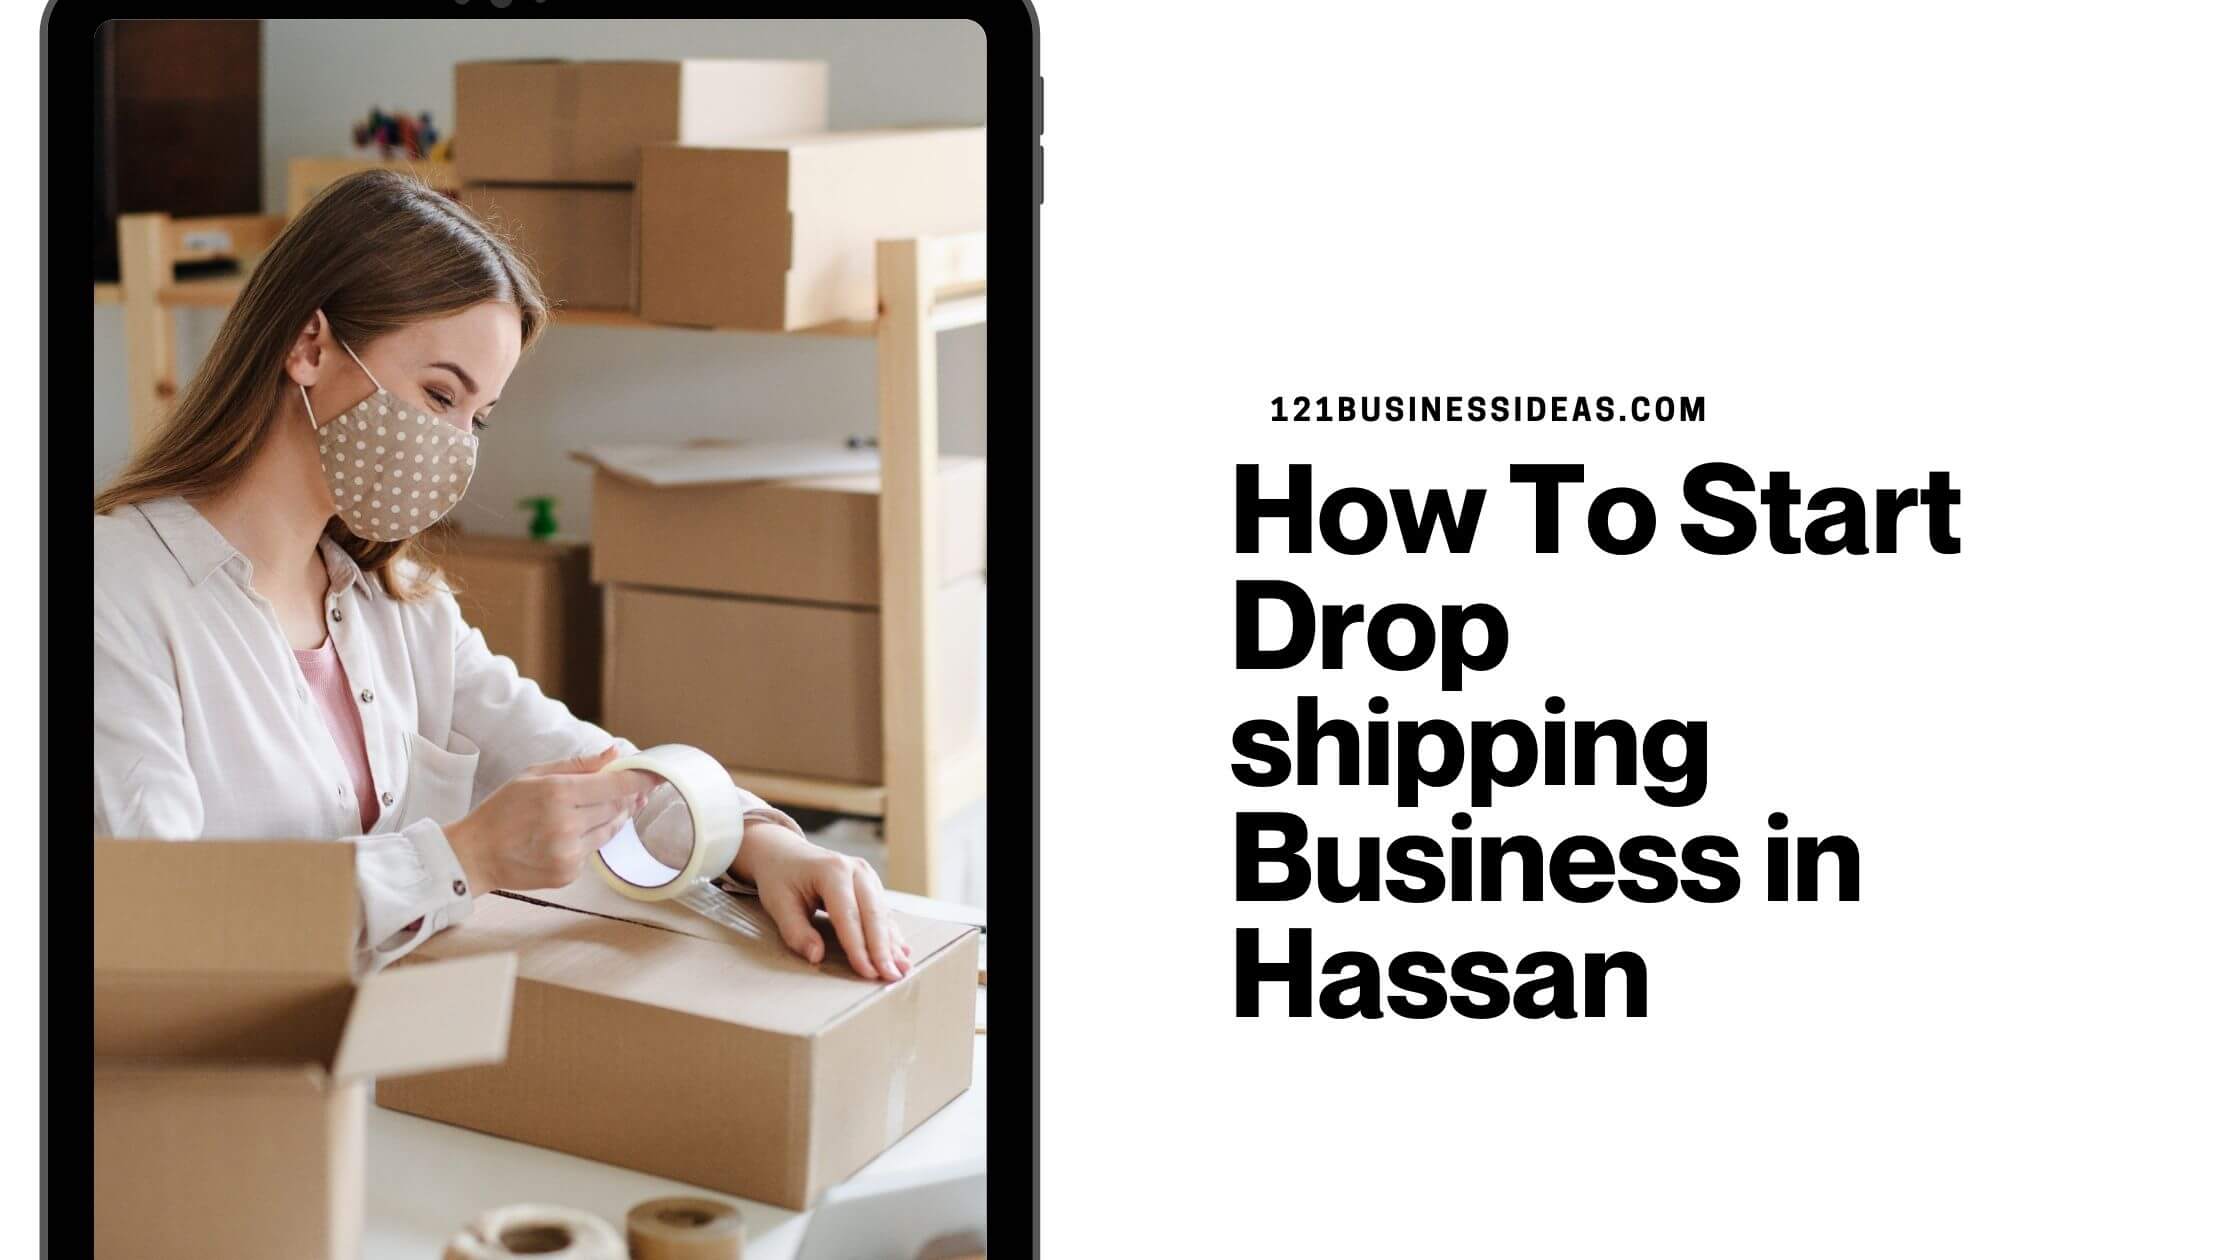 How To Start Drop shipping Business in Hassan (2) (1)